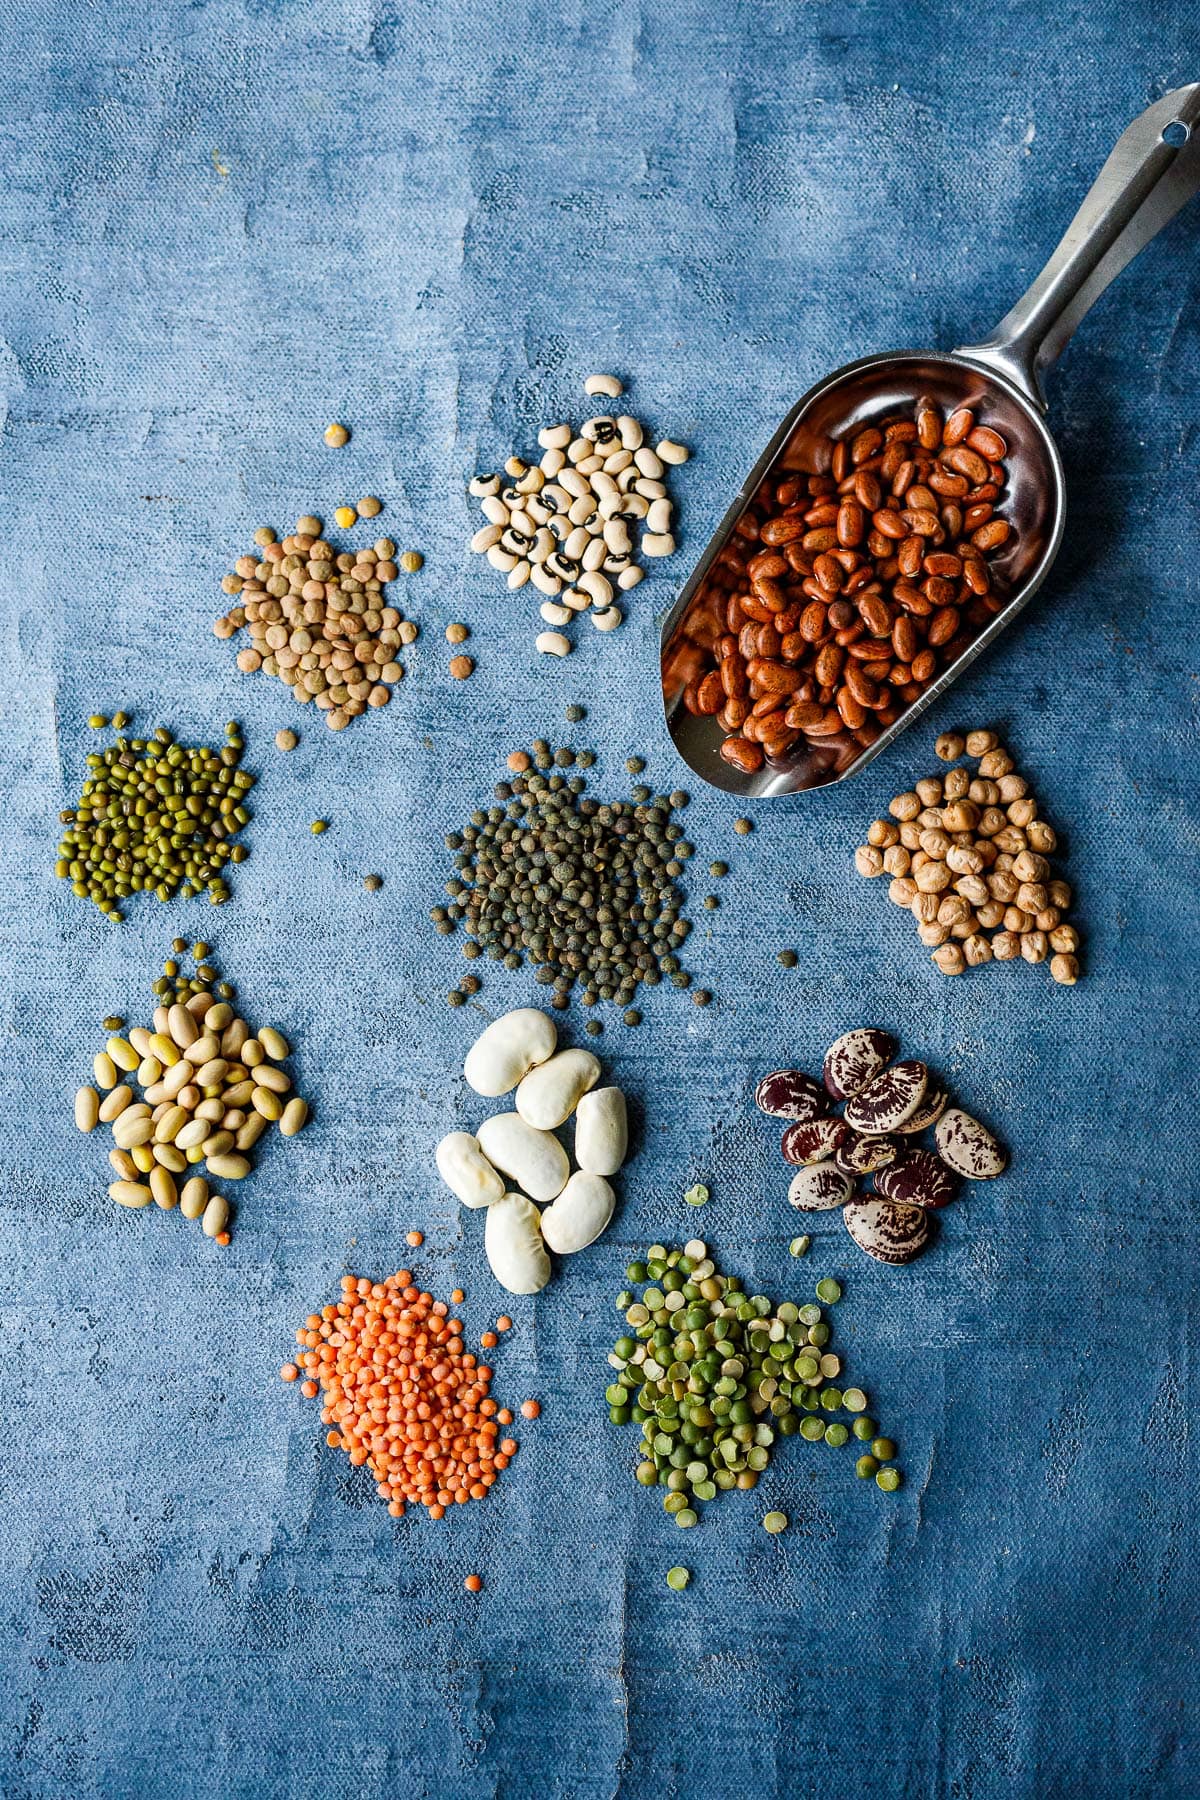 a variety of beans and legumes on a blue background.